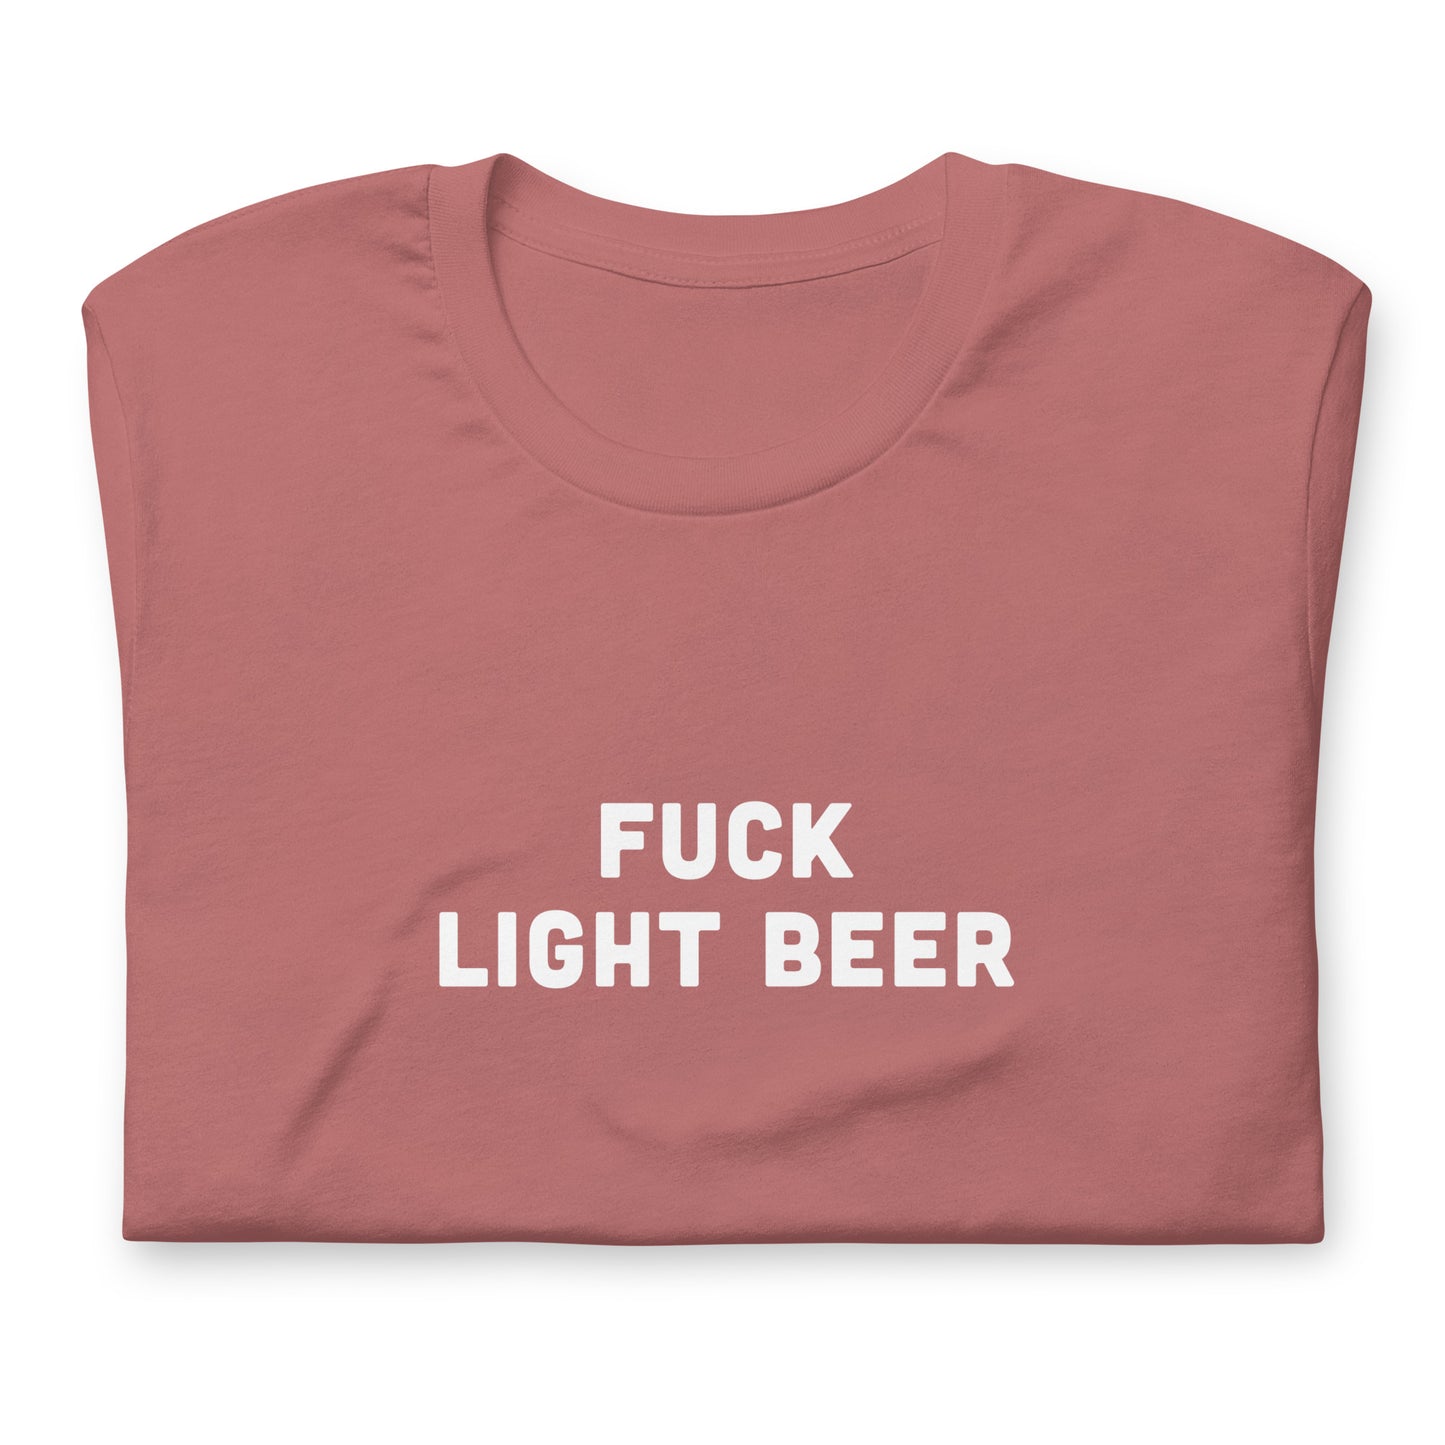 Fuck Light Beer T-Shirt Size 2XL Color Navy